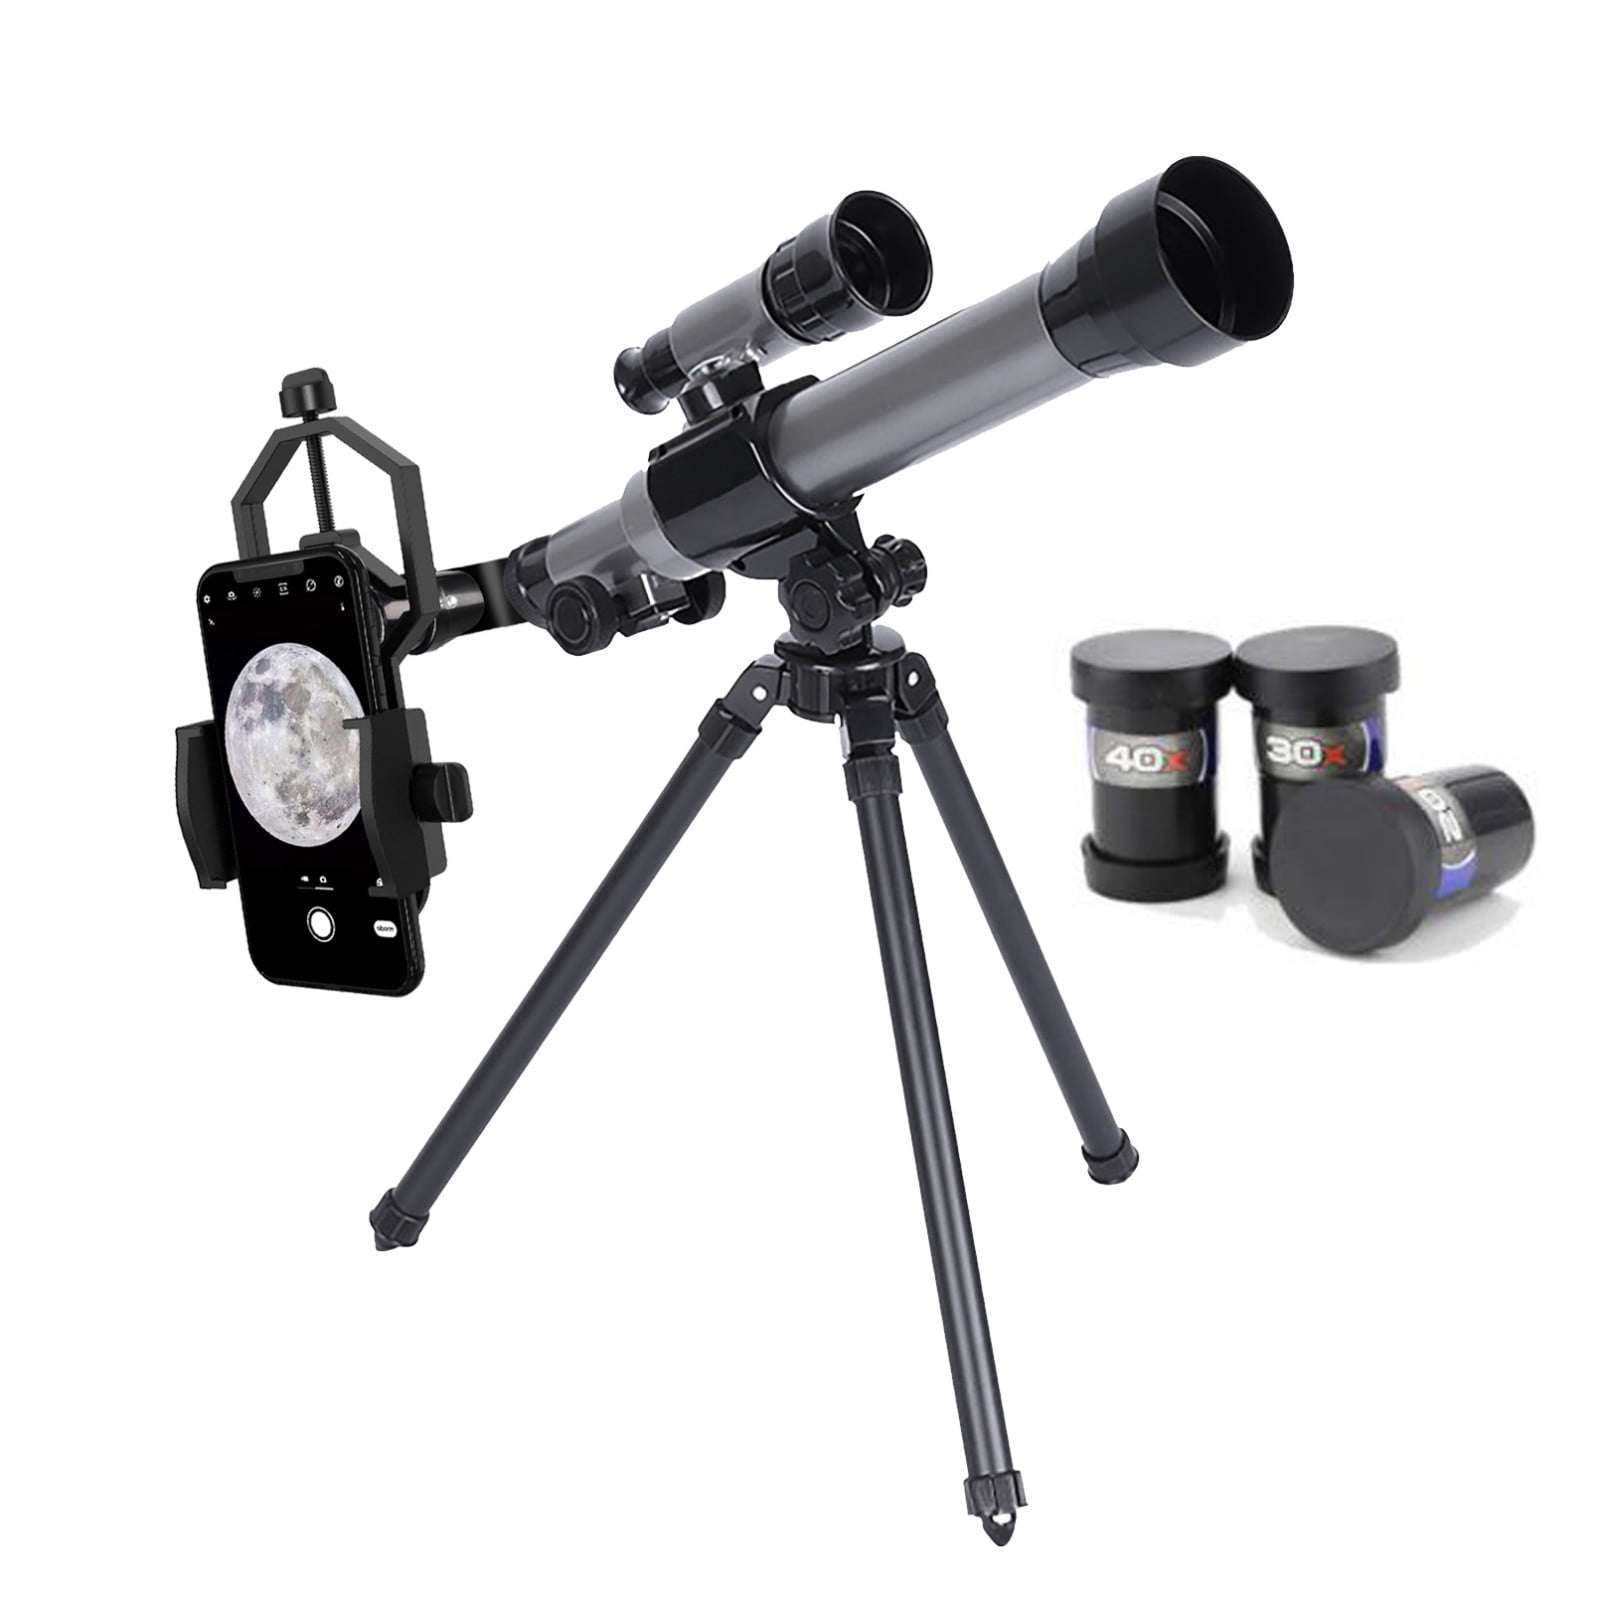 Children Science Education Astronomical Telescope Toy High-Powered Monocular 